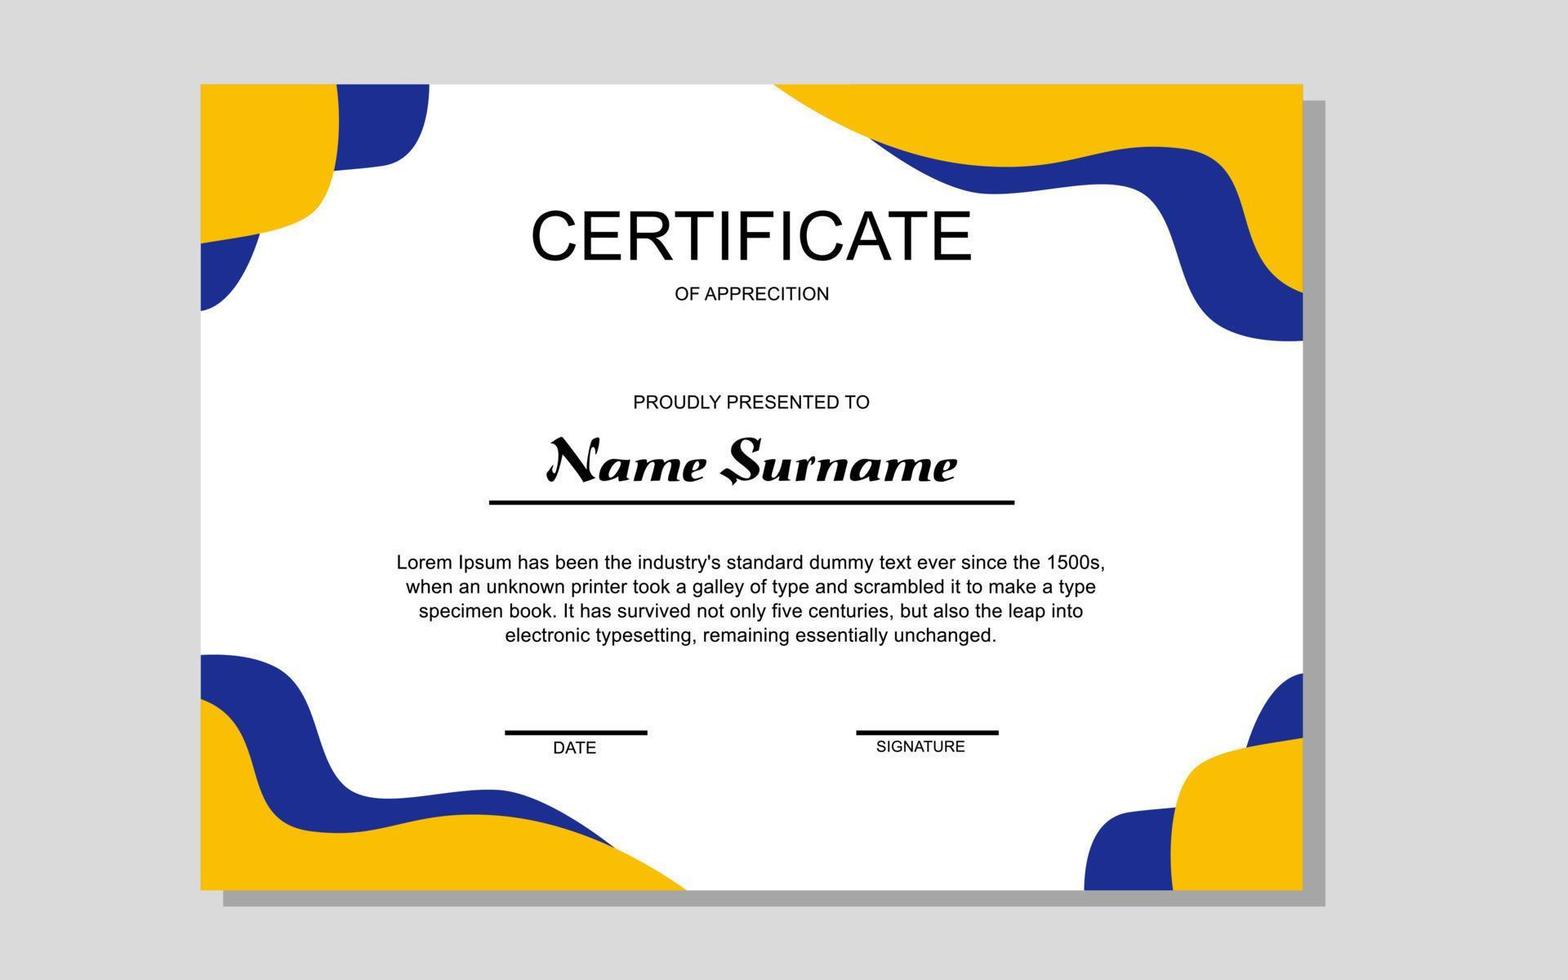 certificate design in yellow and blue modern style vector